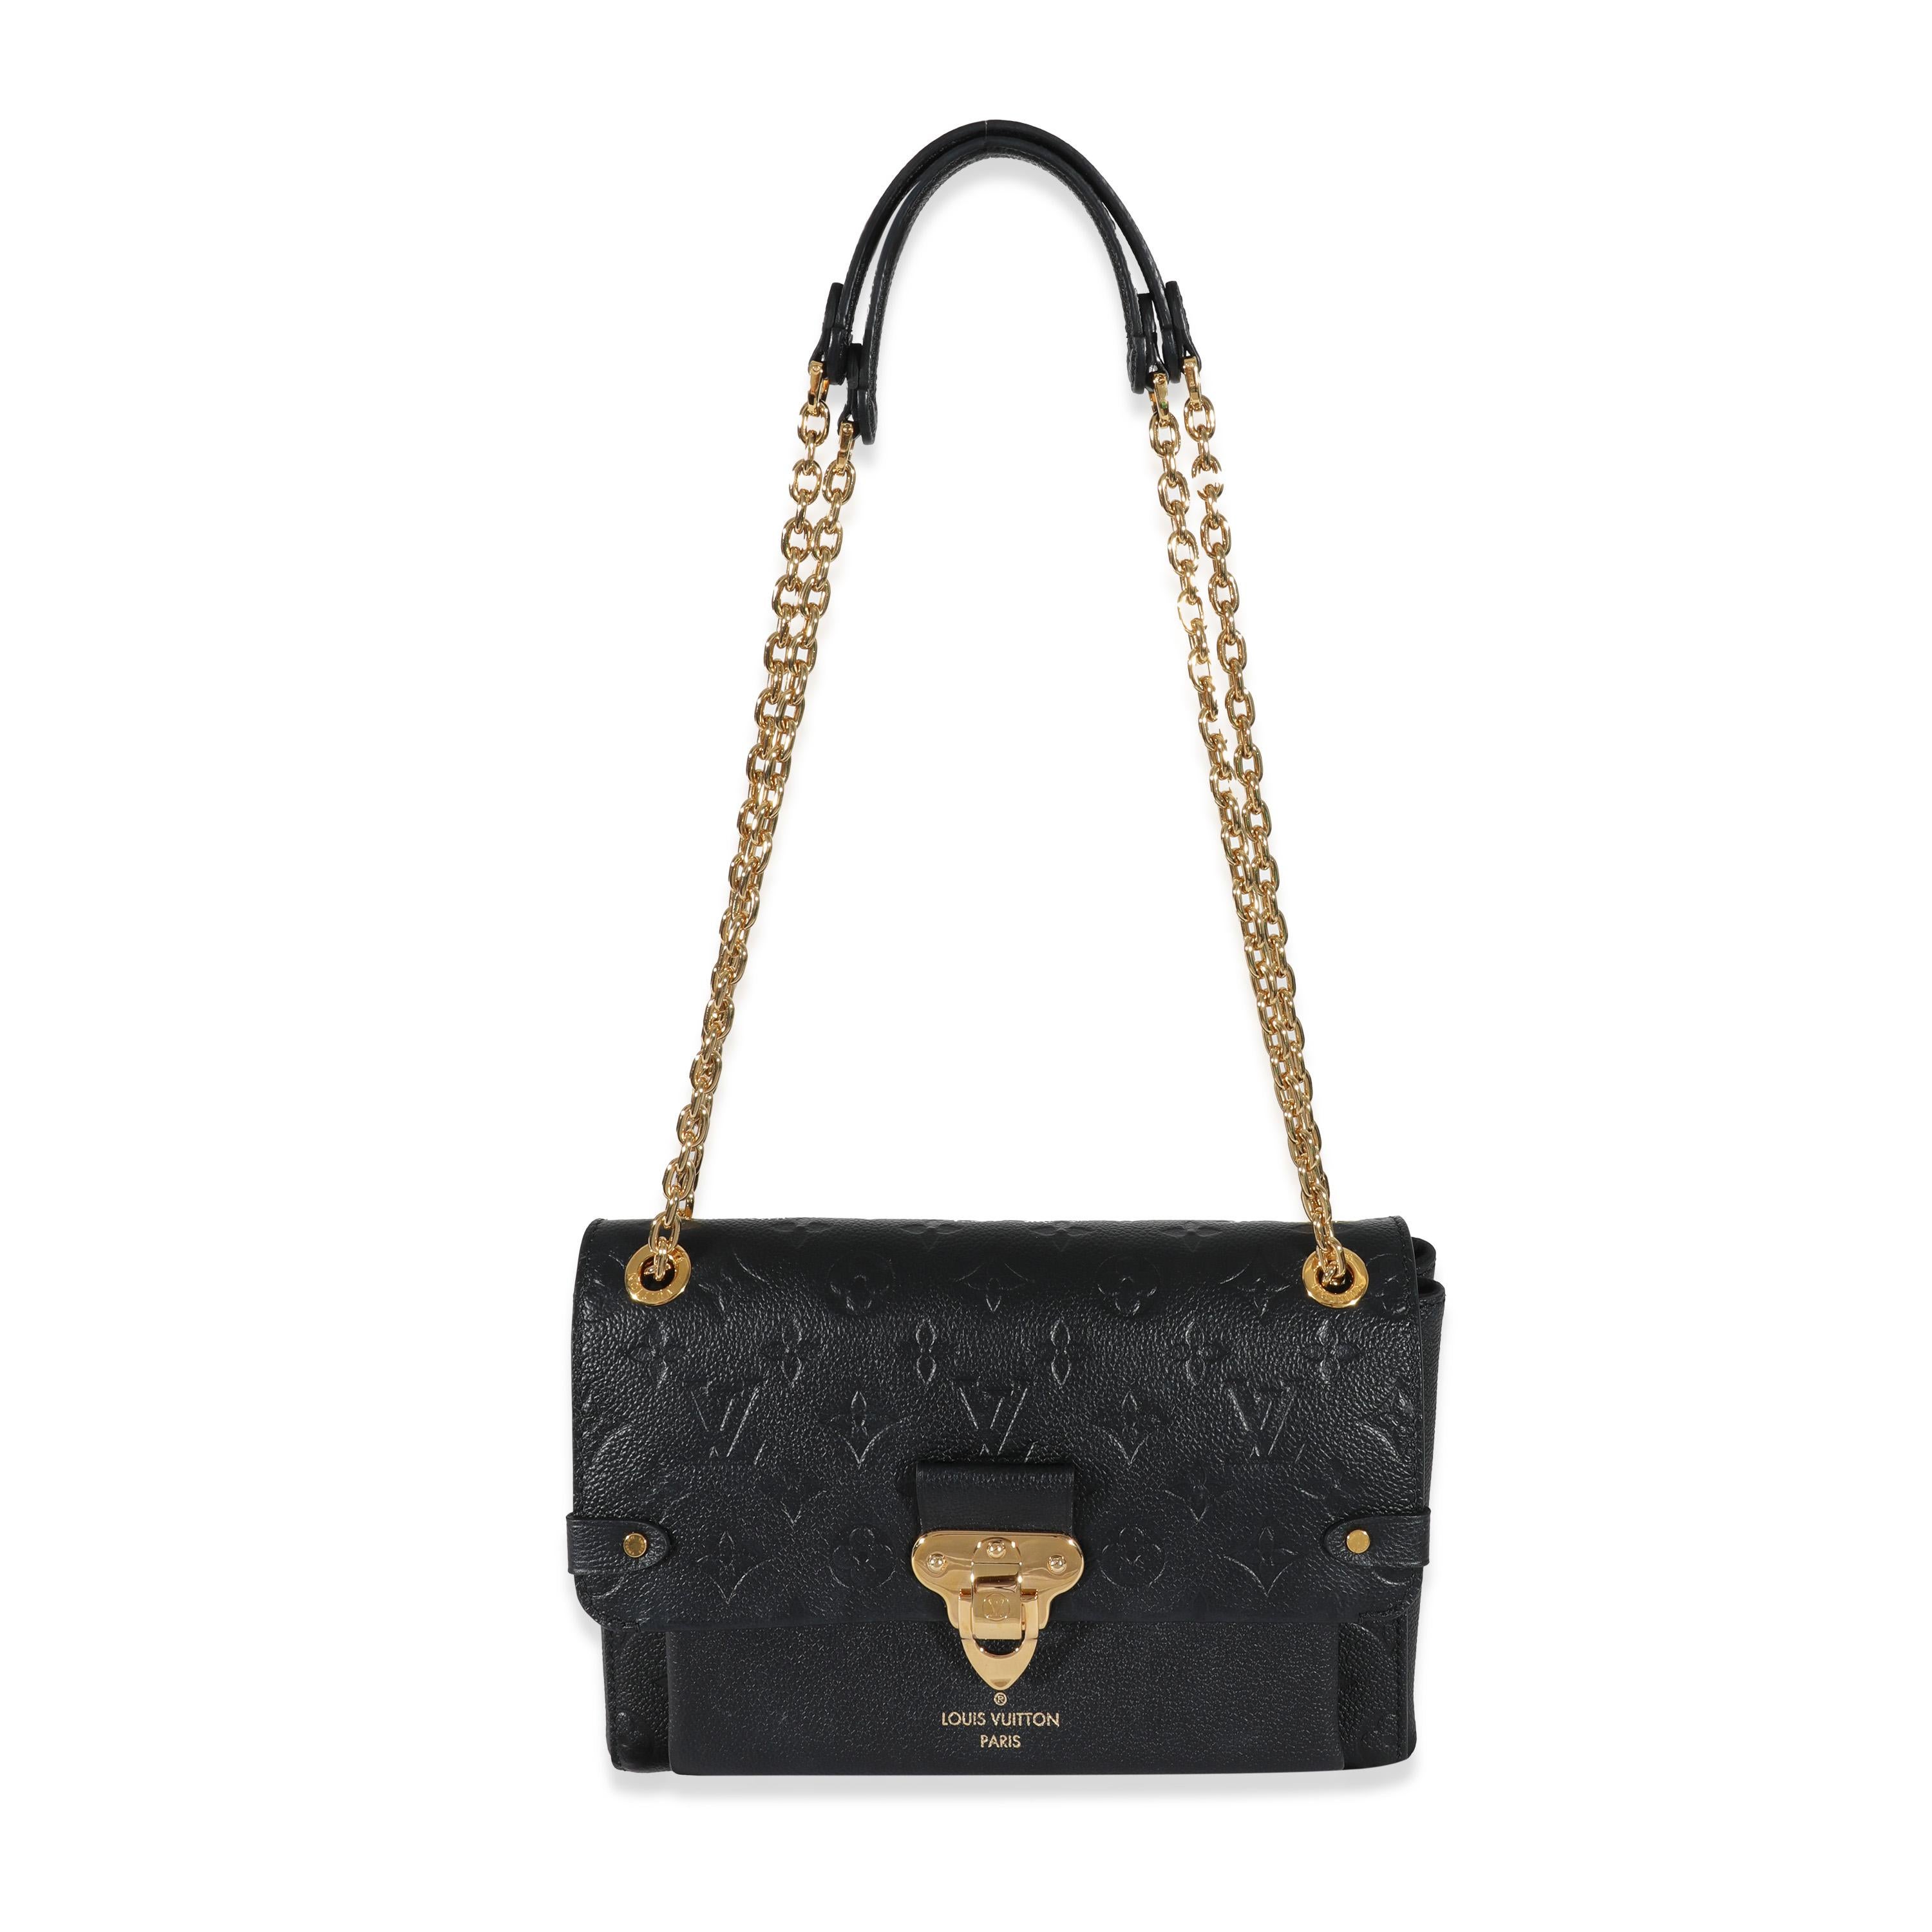 Listing Title: Louis Vuitton Black Empreinte Vavin PM
SKU: 130934
MSRP: 3100.00
Condition: Pre-owned 
Handbag Condition: Very Good
Condition Comments: Item is in very good condition with minor signs of wear. Exterior scuffing throughout body. Heavy